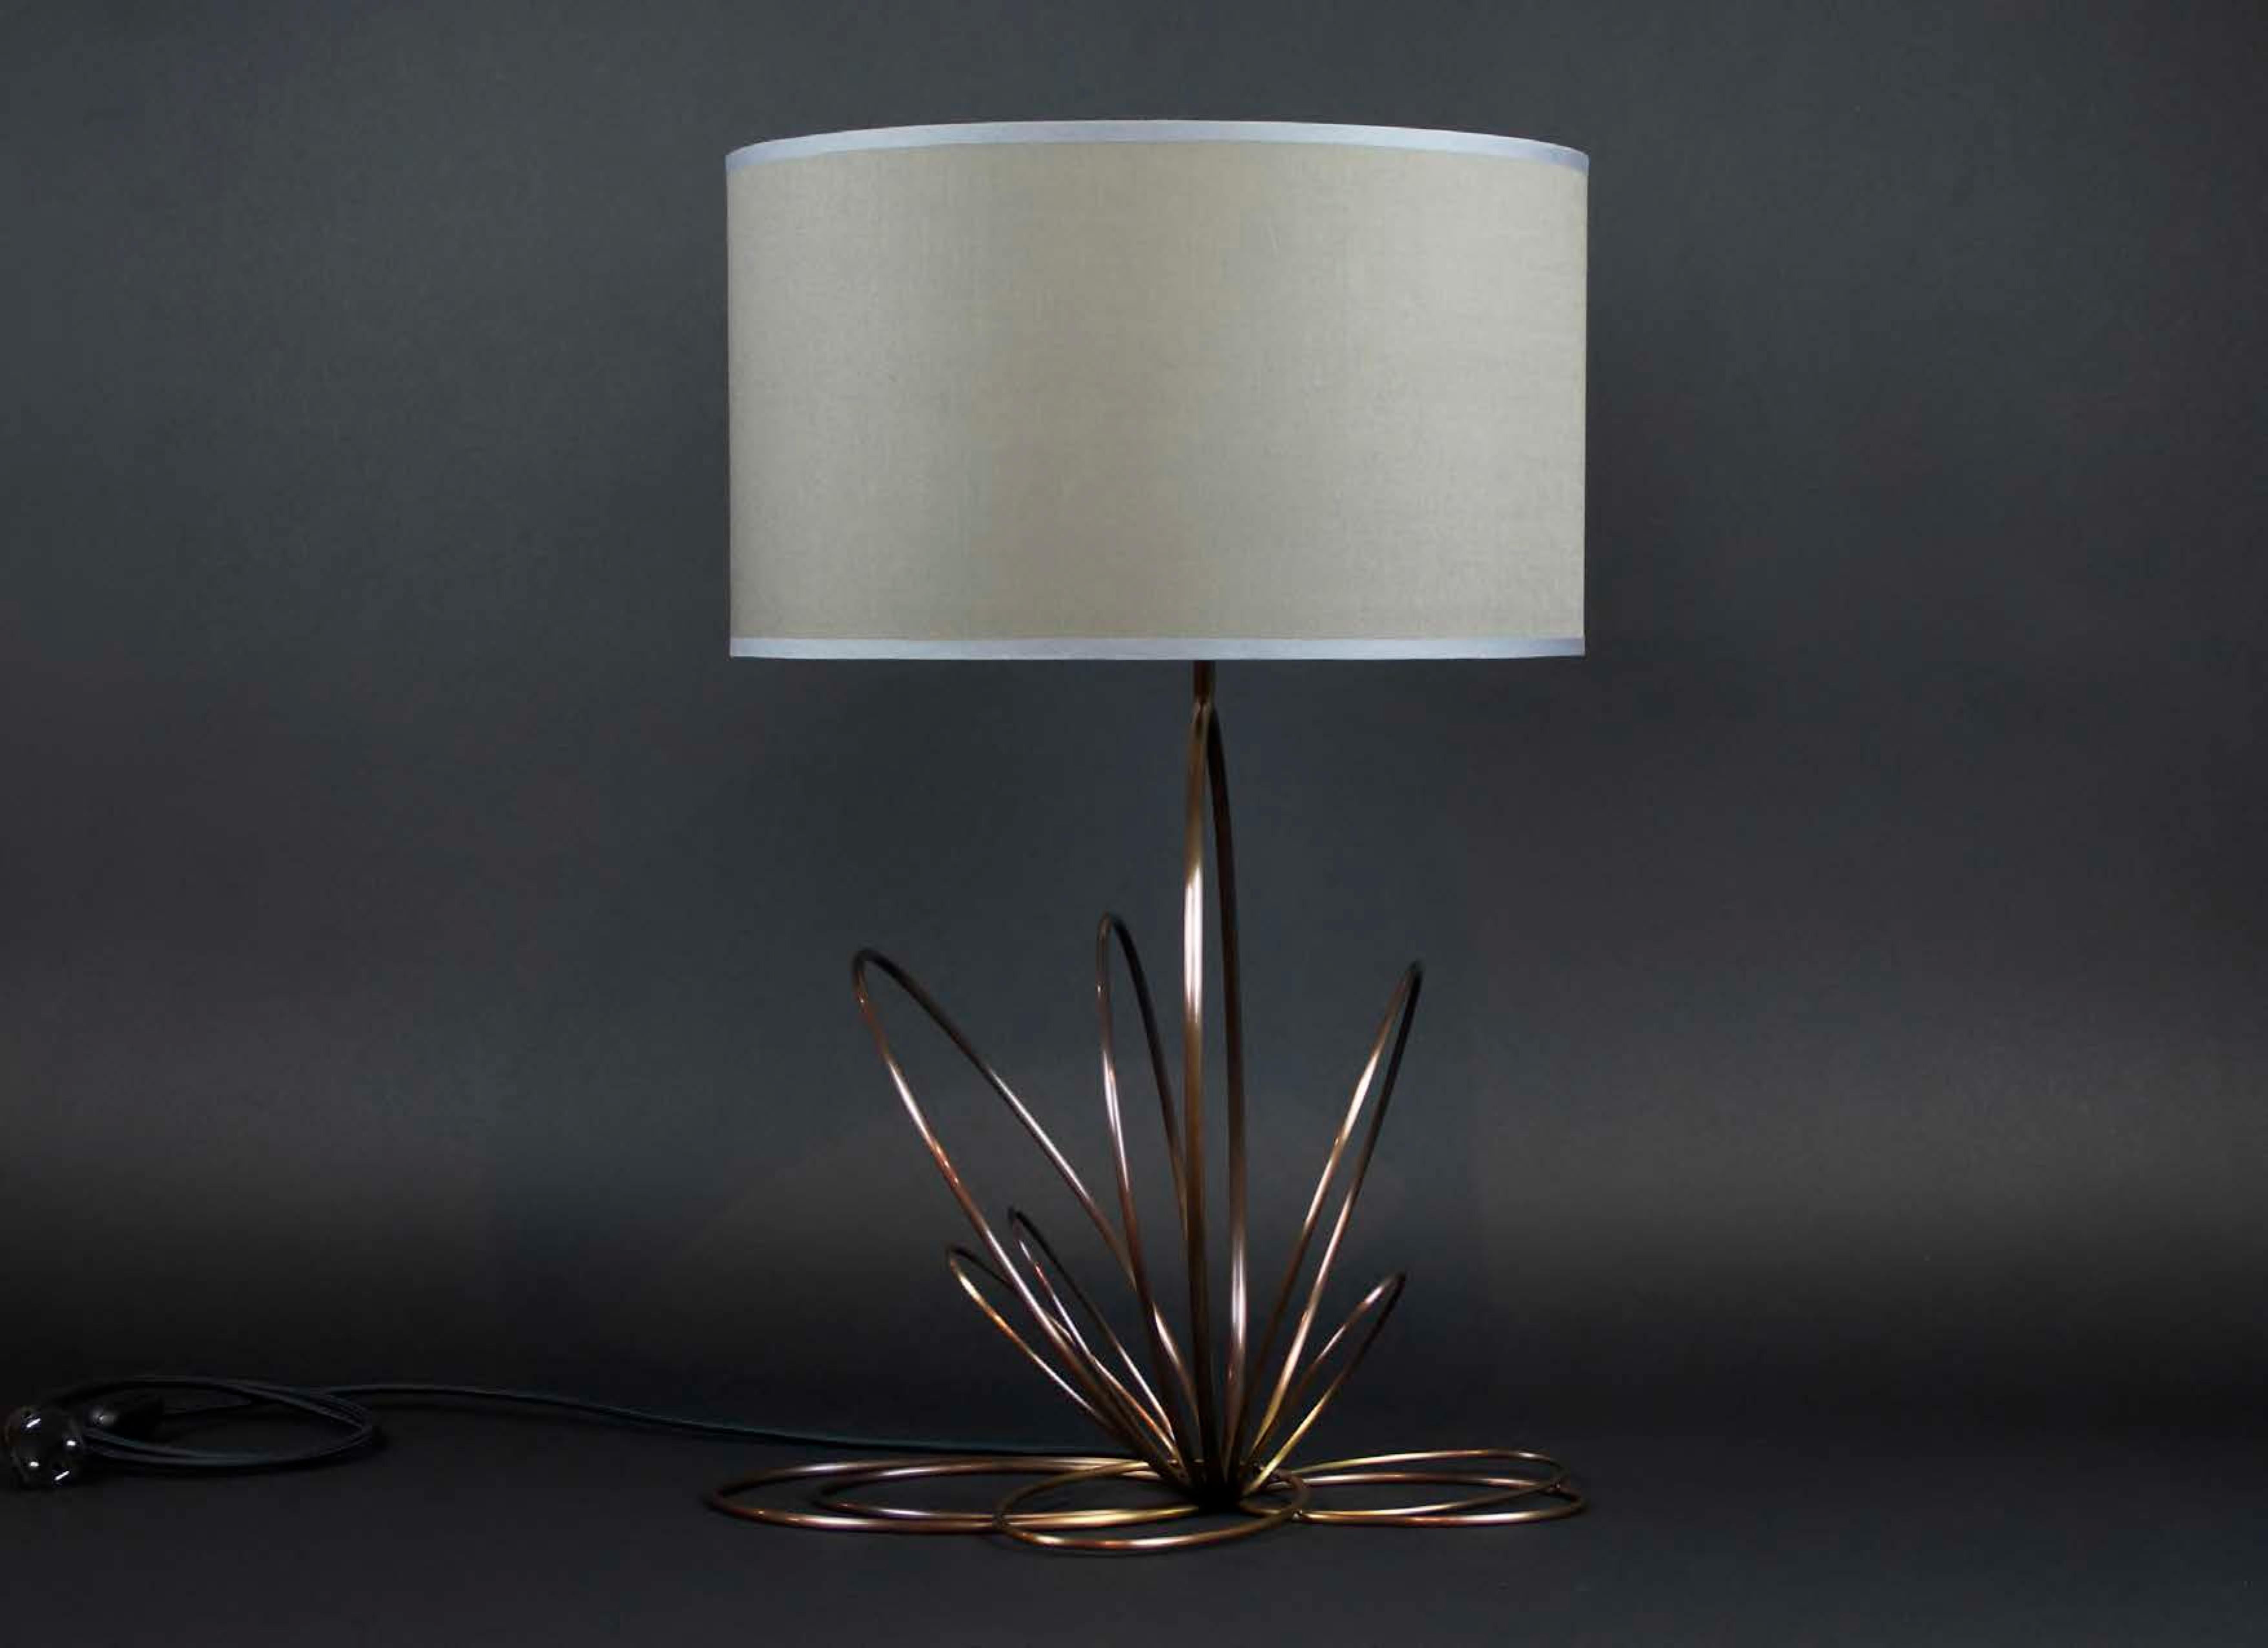 Ellipse 2 Table Lamp by Atelier Demichelis
Dimensions: W 41 x D 43 x H 63 cm
Materials: Patinated Brass, Grey Fabric Shade

Laura Demichelis

Laura was born & brought up in Provence, in the south of France.
Trained at the École Boulle in Paris, she